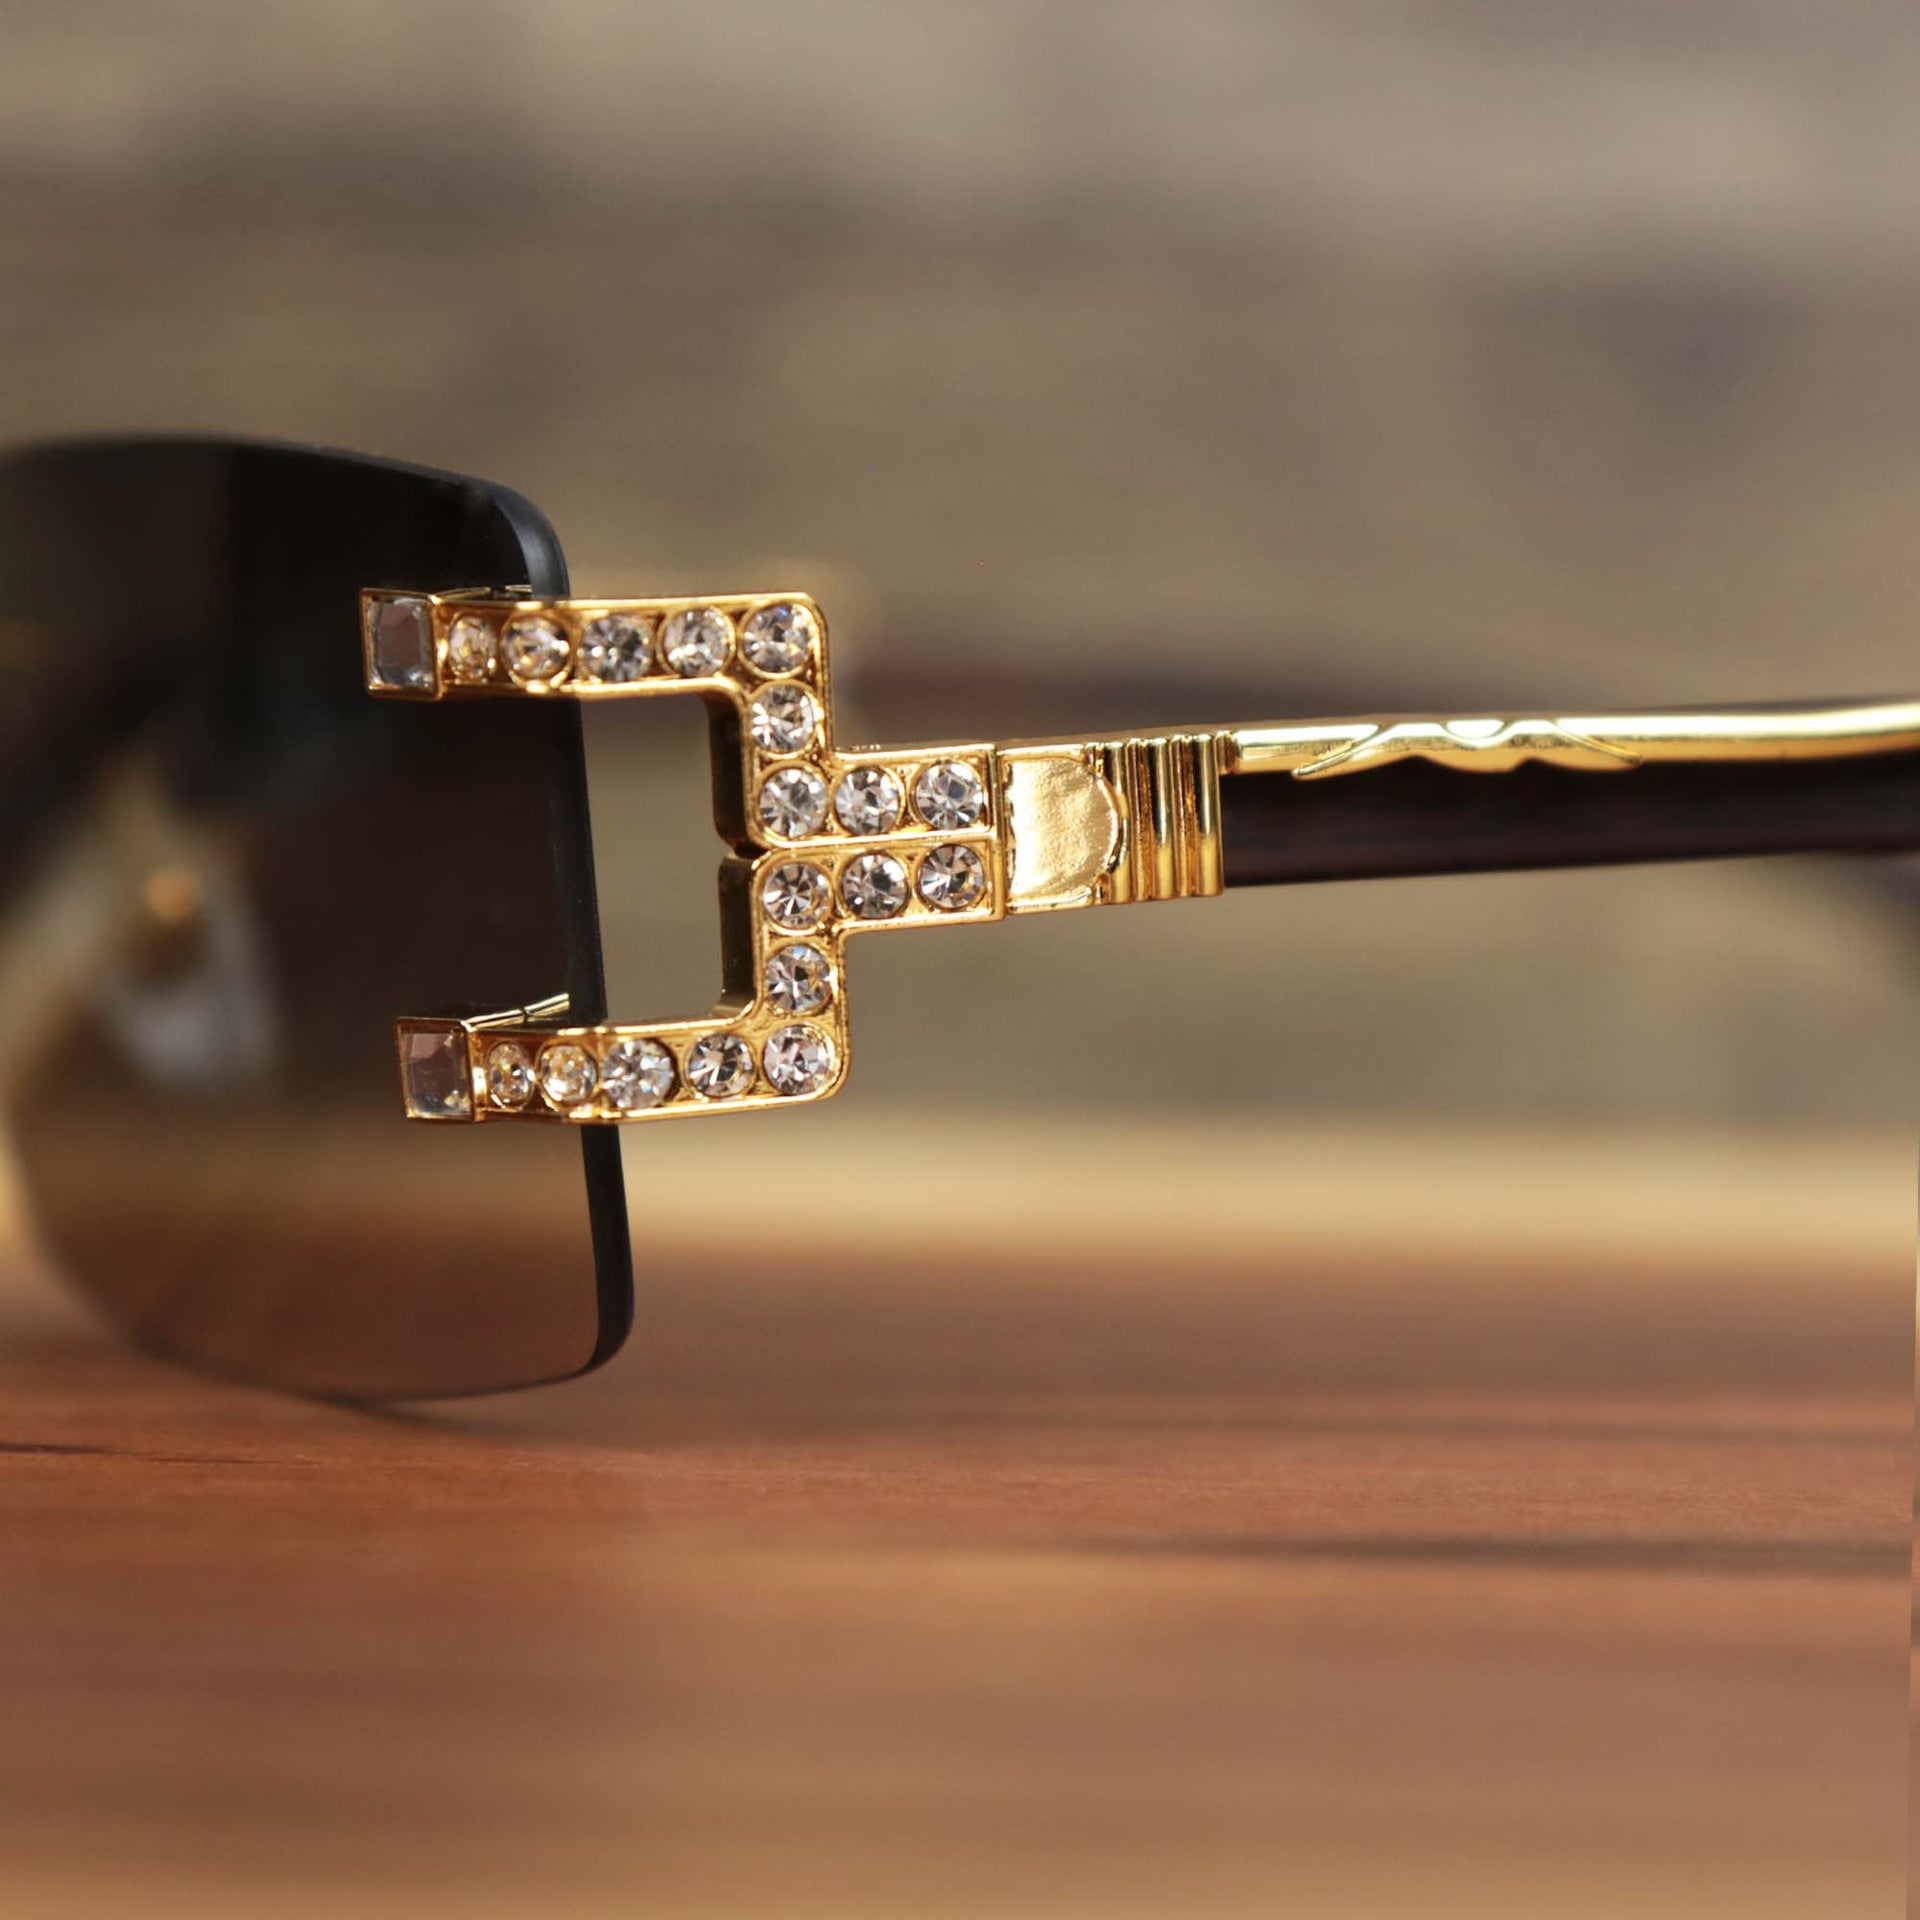 The hinge on the Rectangle Frames Black Lens Flooded Sunglasses with Gold Frame